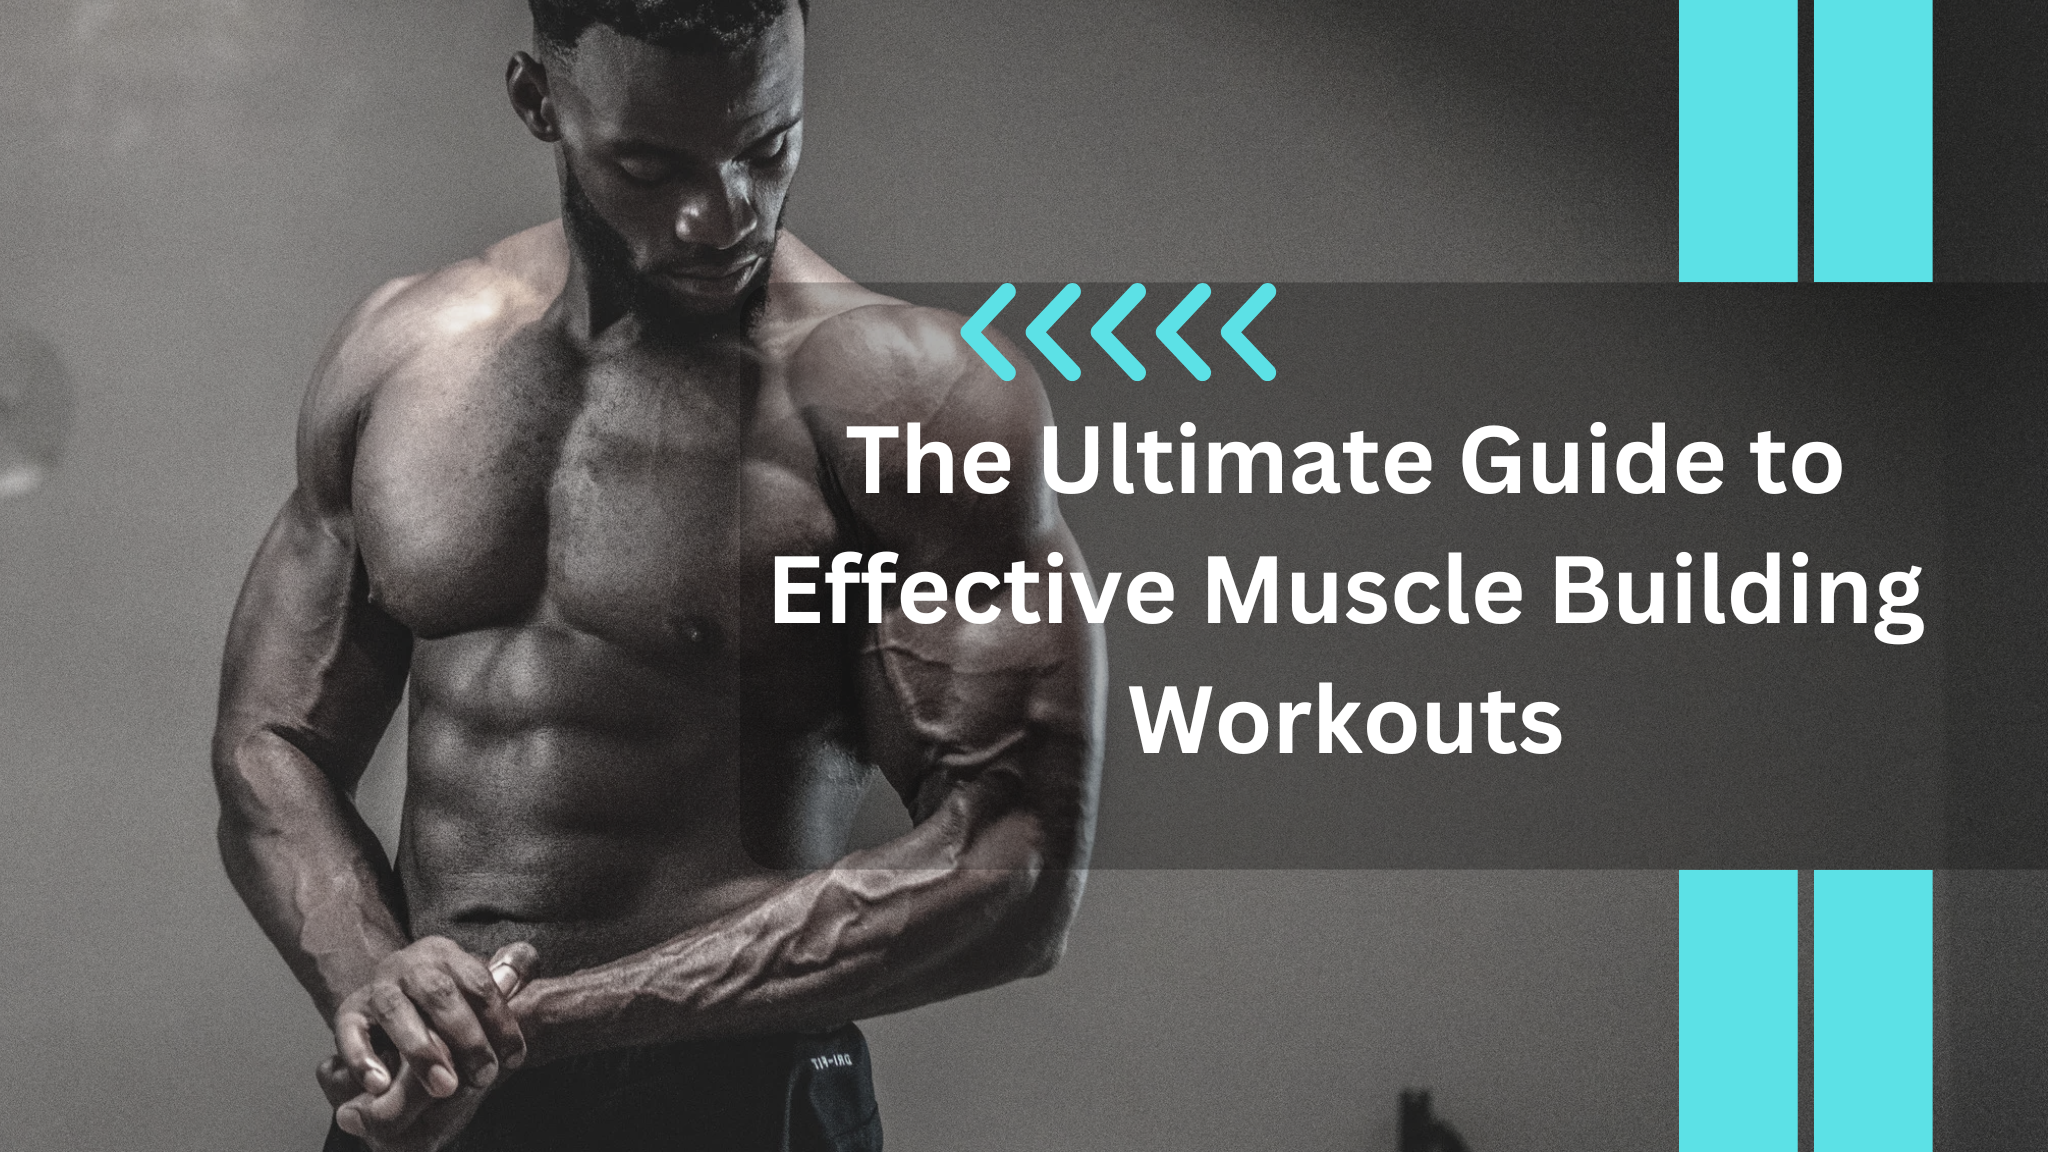 The Ultimate Guide To Effective Muscle Building Workouts